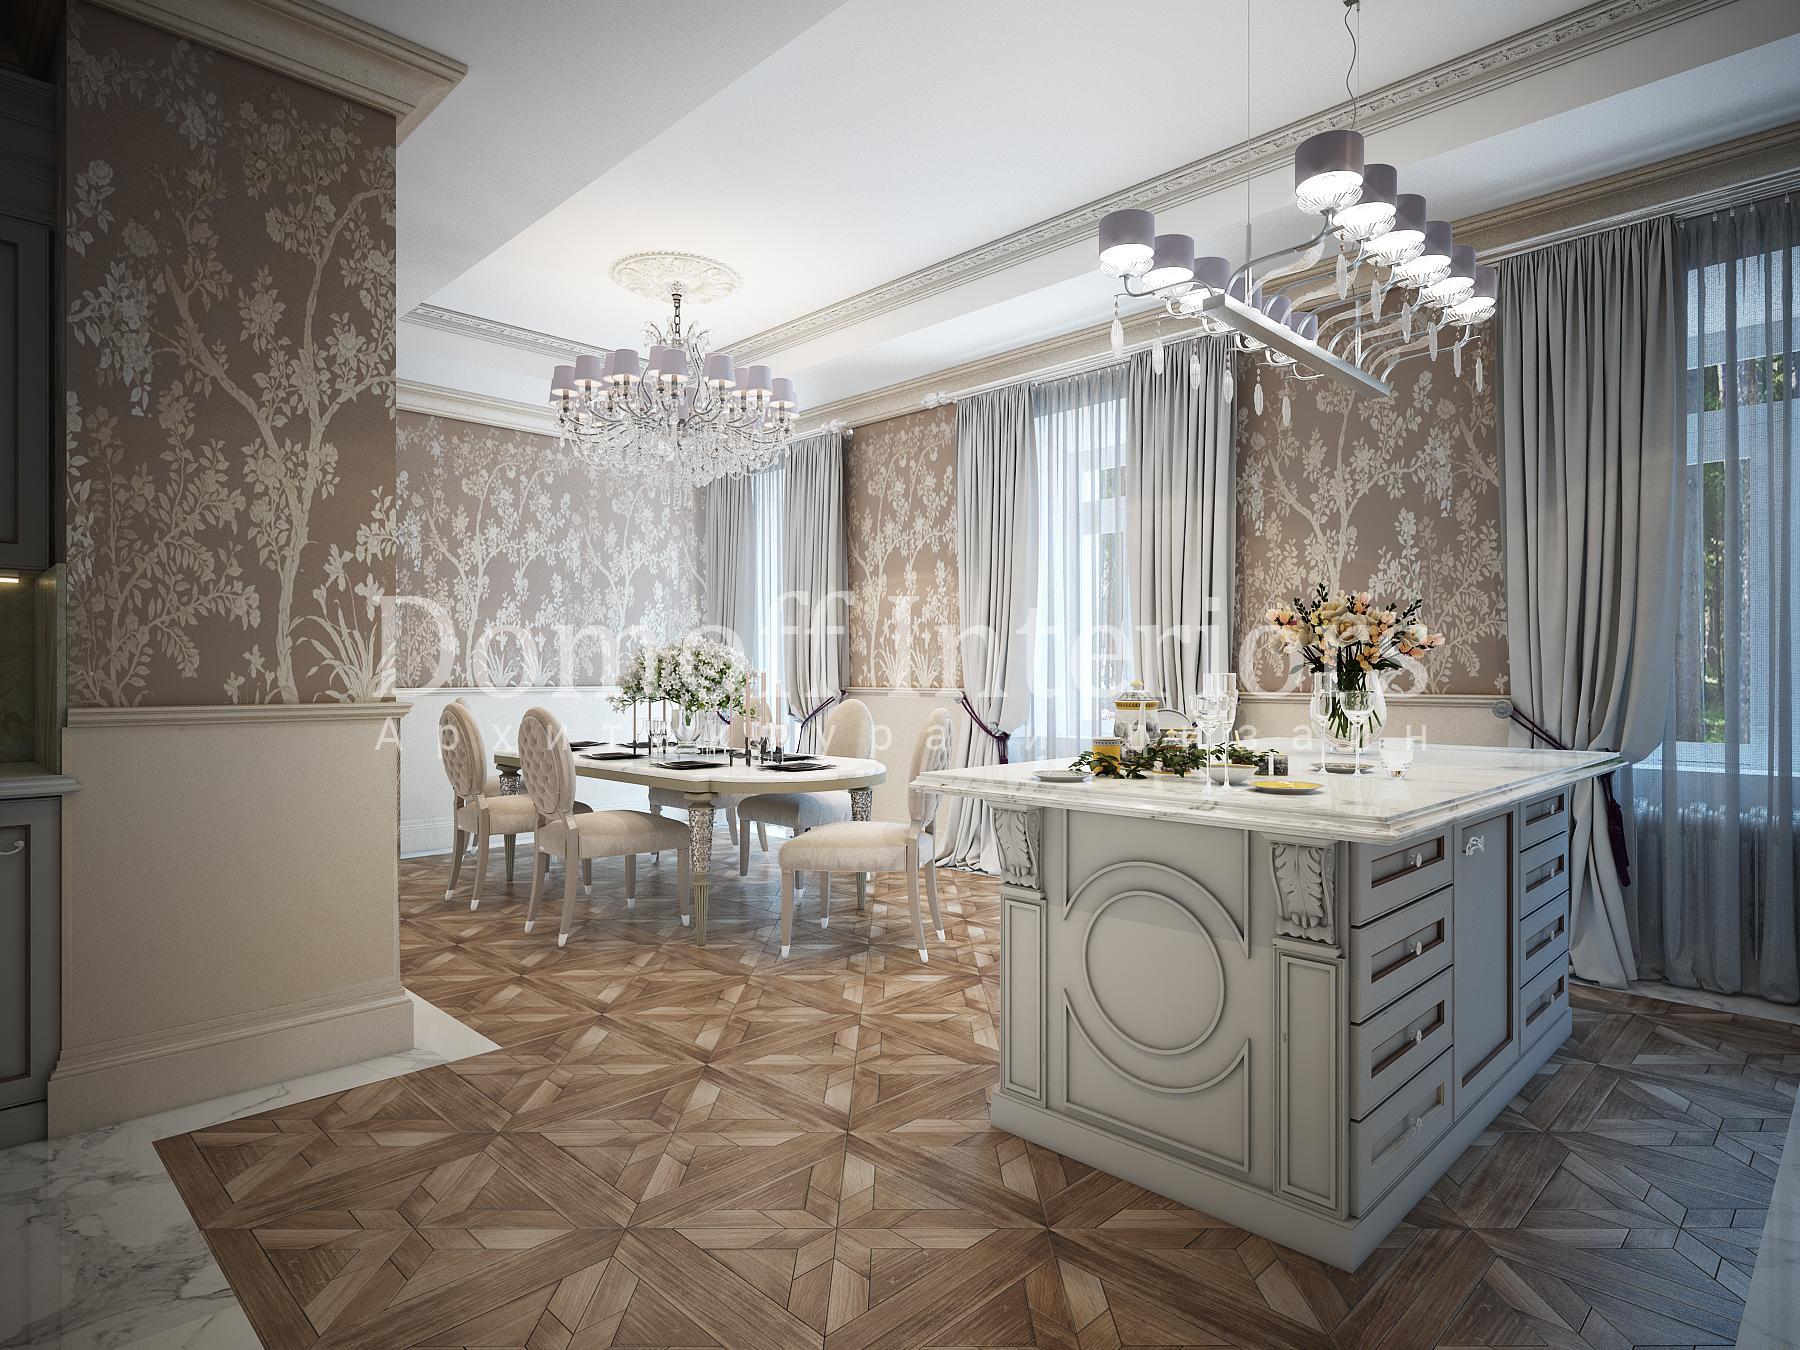 Kitchen&dining room made in the style of Eclecticism